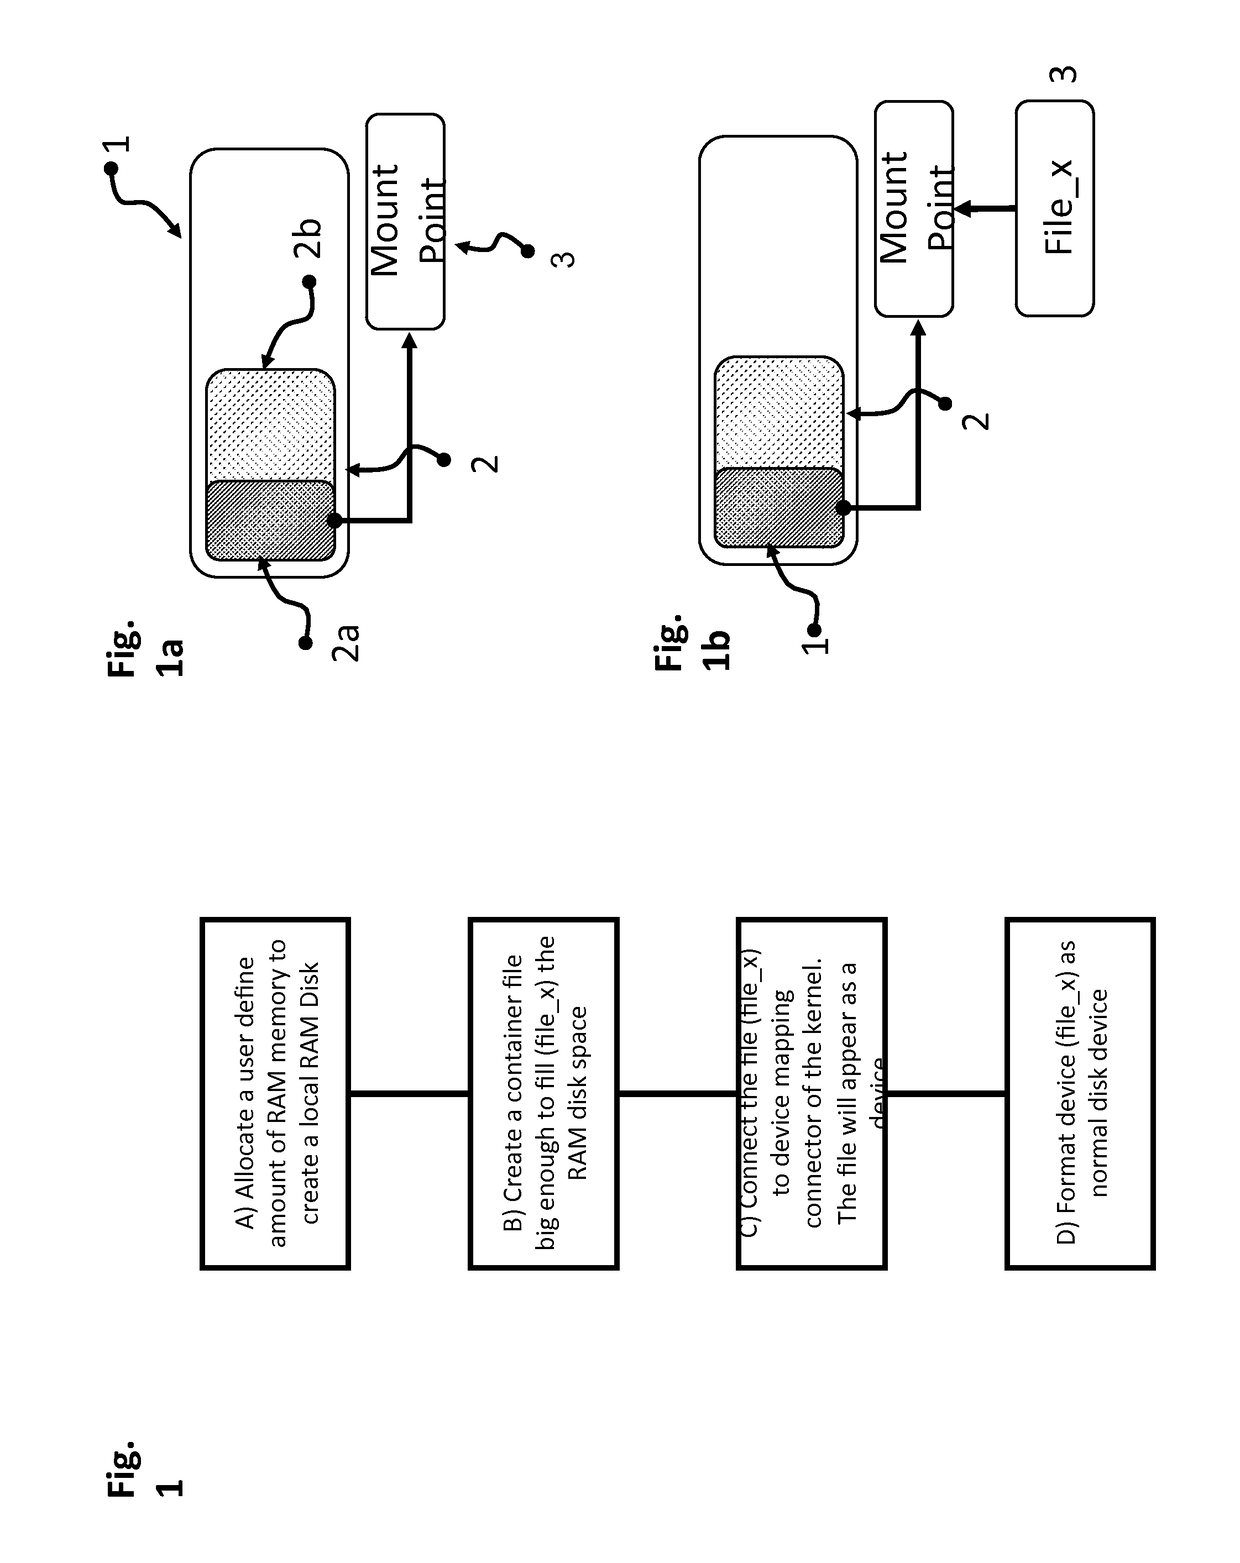 Scale Out Storage Architecture for In-Memory Computing and Related Method for Storing Multiple Petabytes of Data Entirely in System RAM Memory